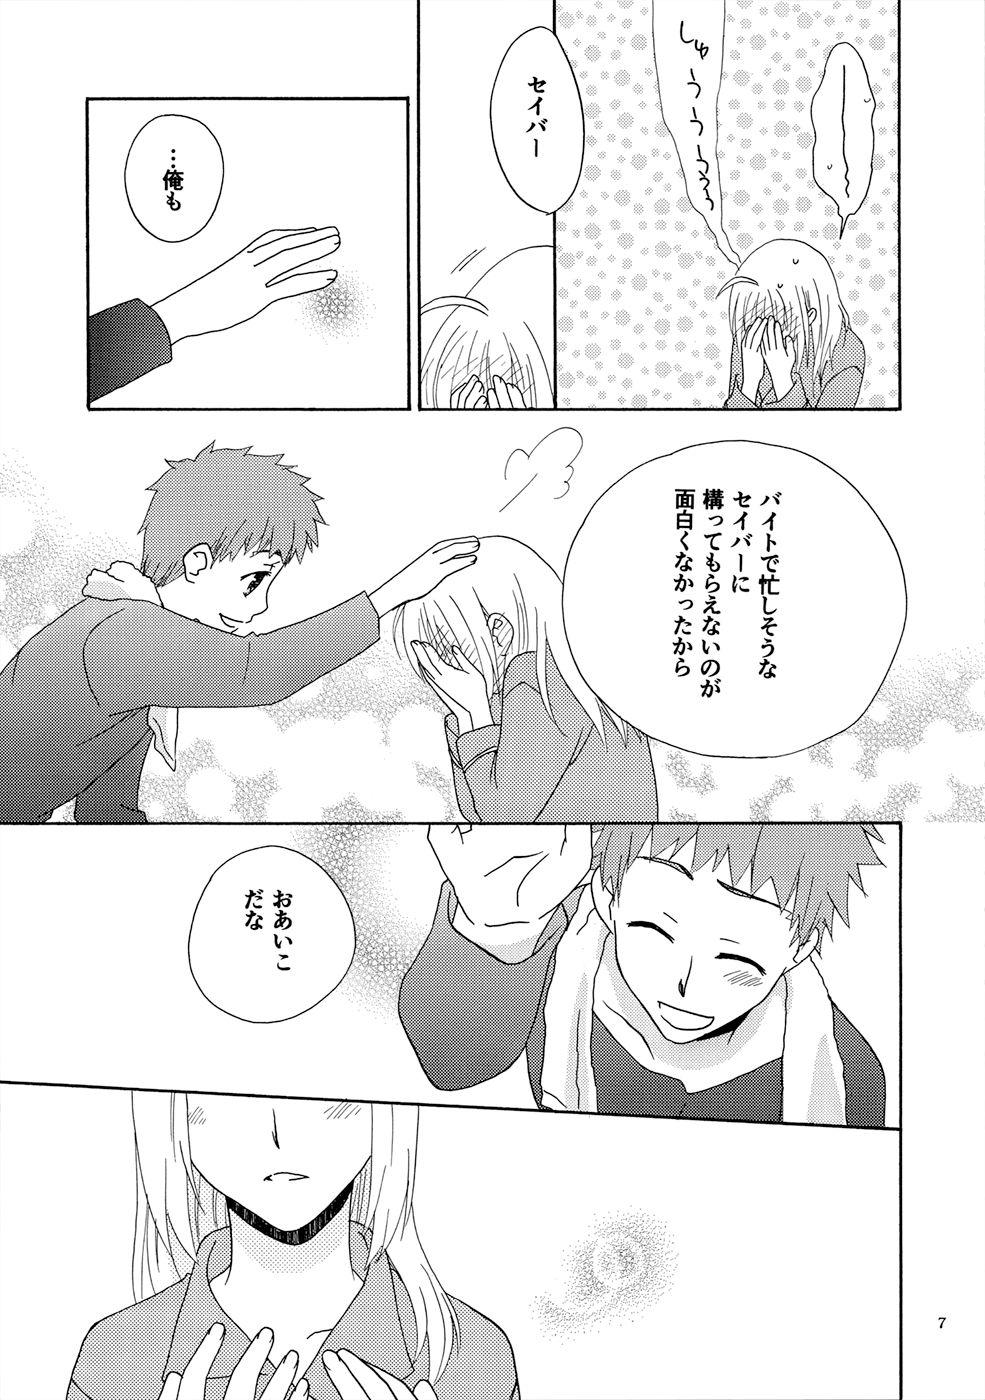 Large POP STAR - Fate stay night Asstomouth - Page 6